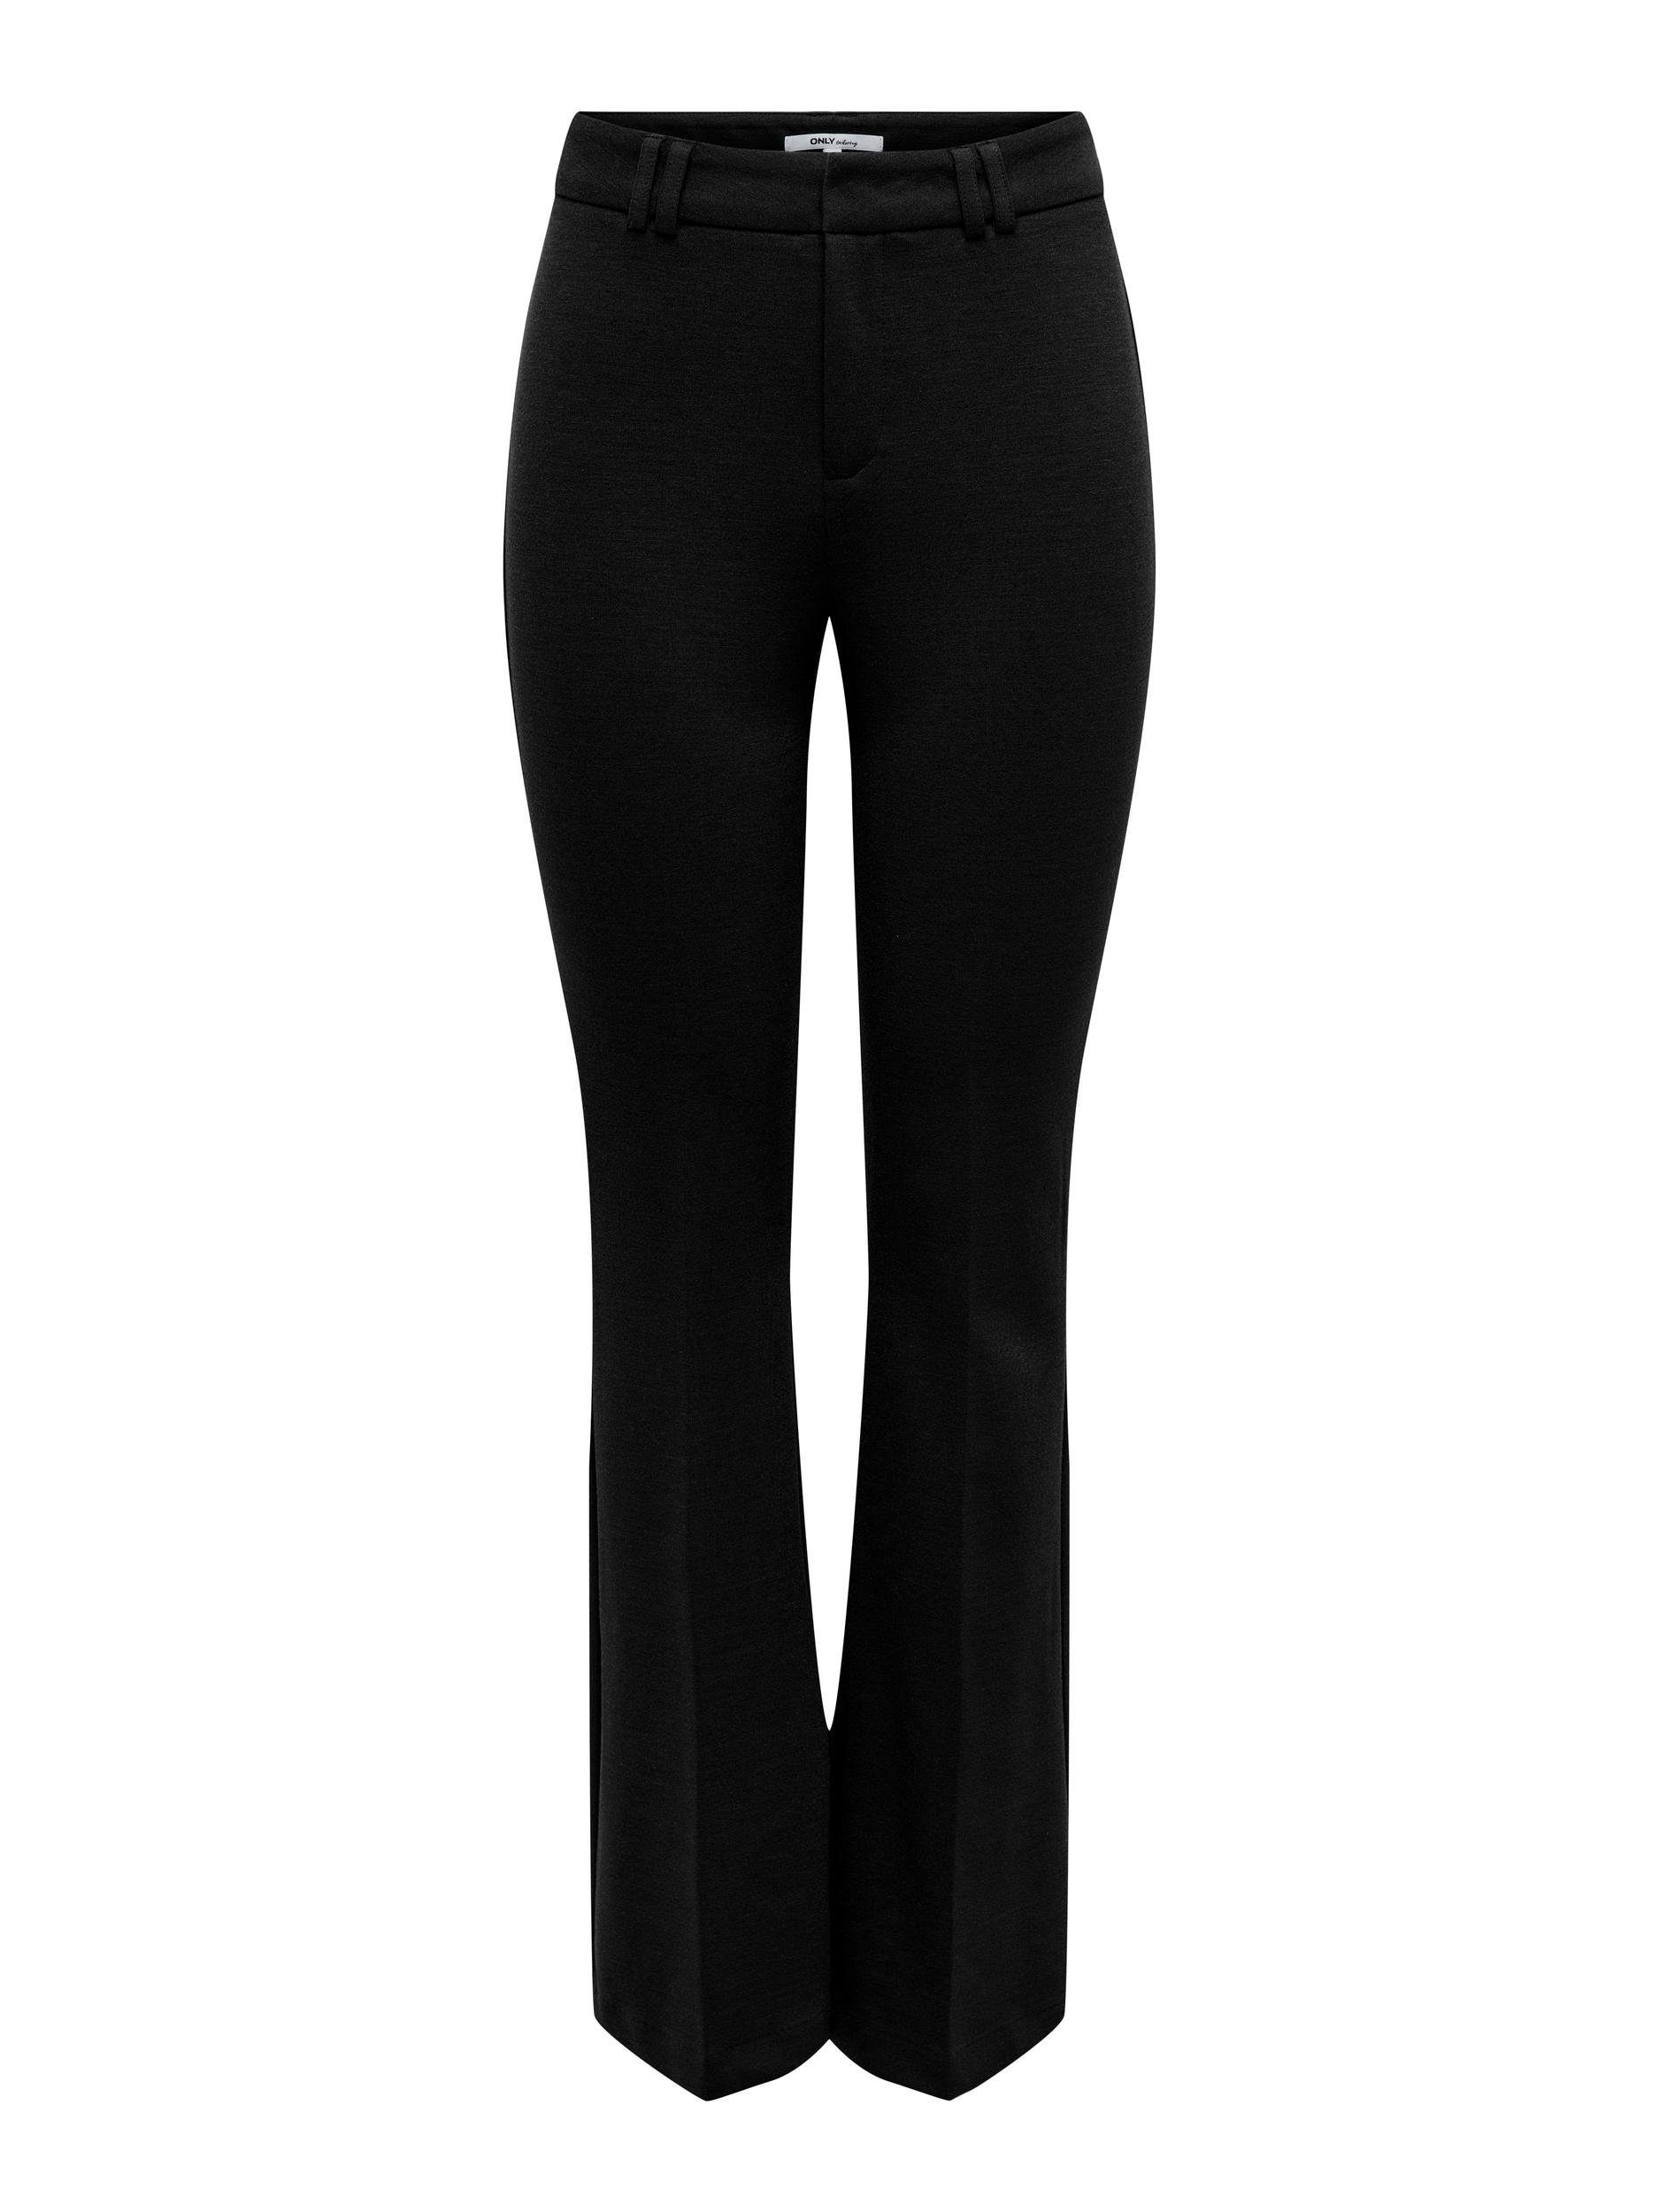 ONLPEACH PANT Anzughose NOOS ONLY FLARED TLR MW Black